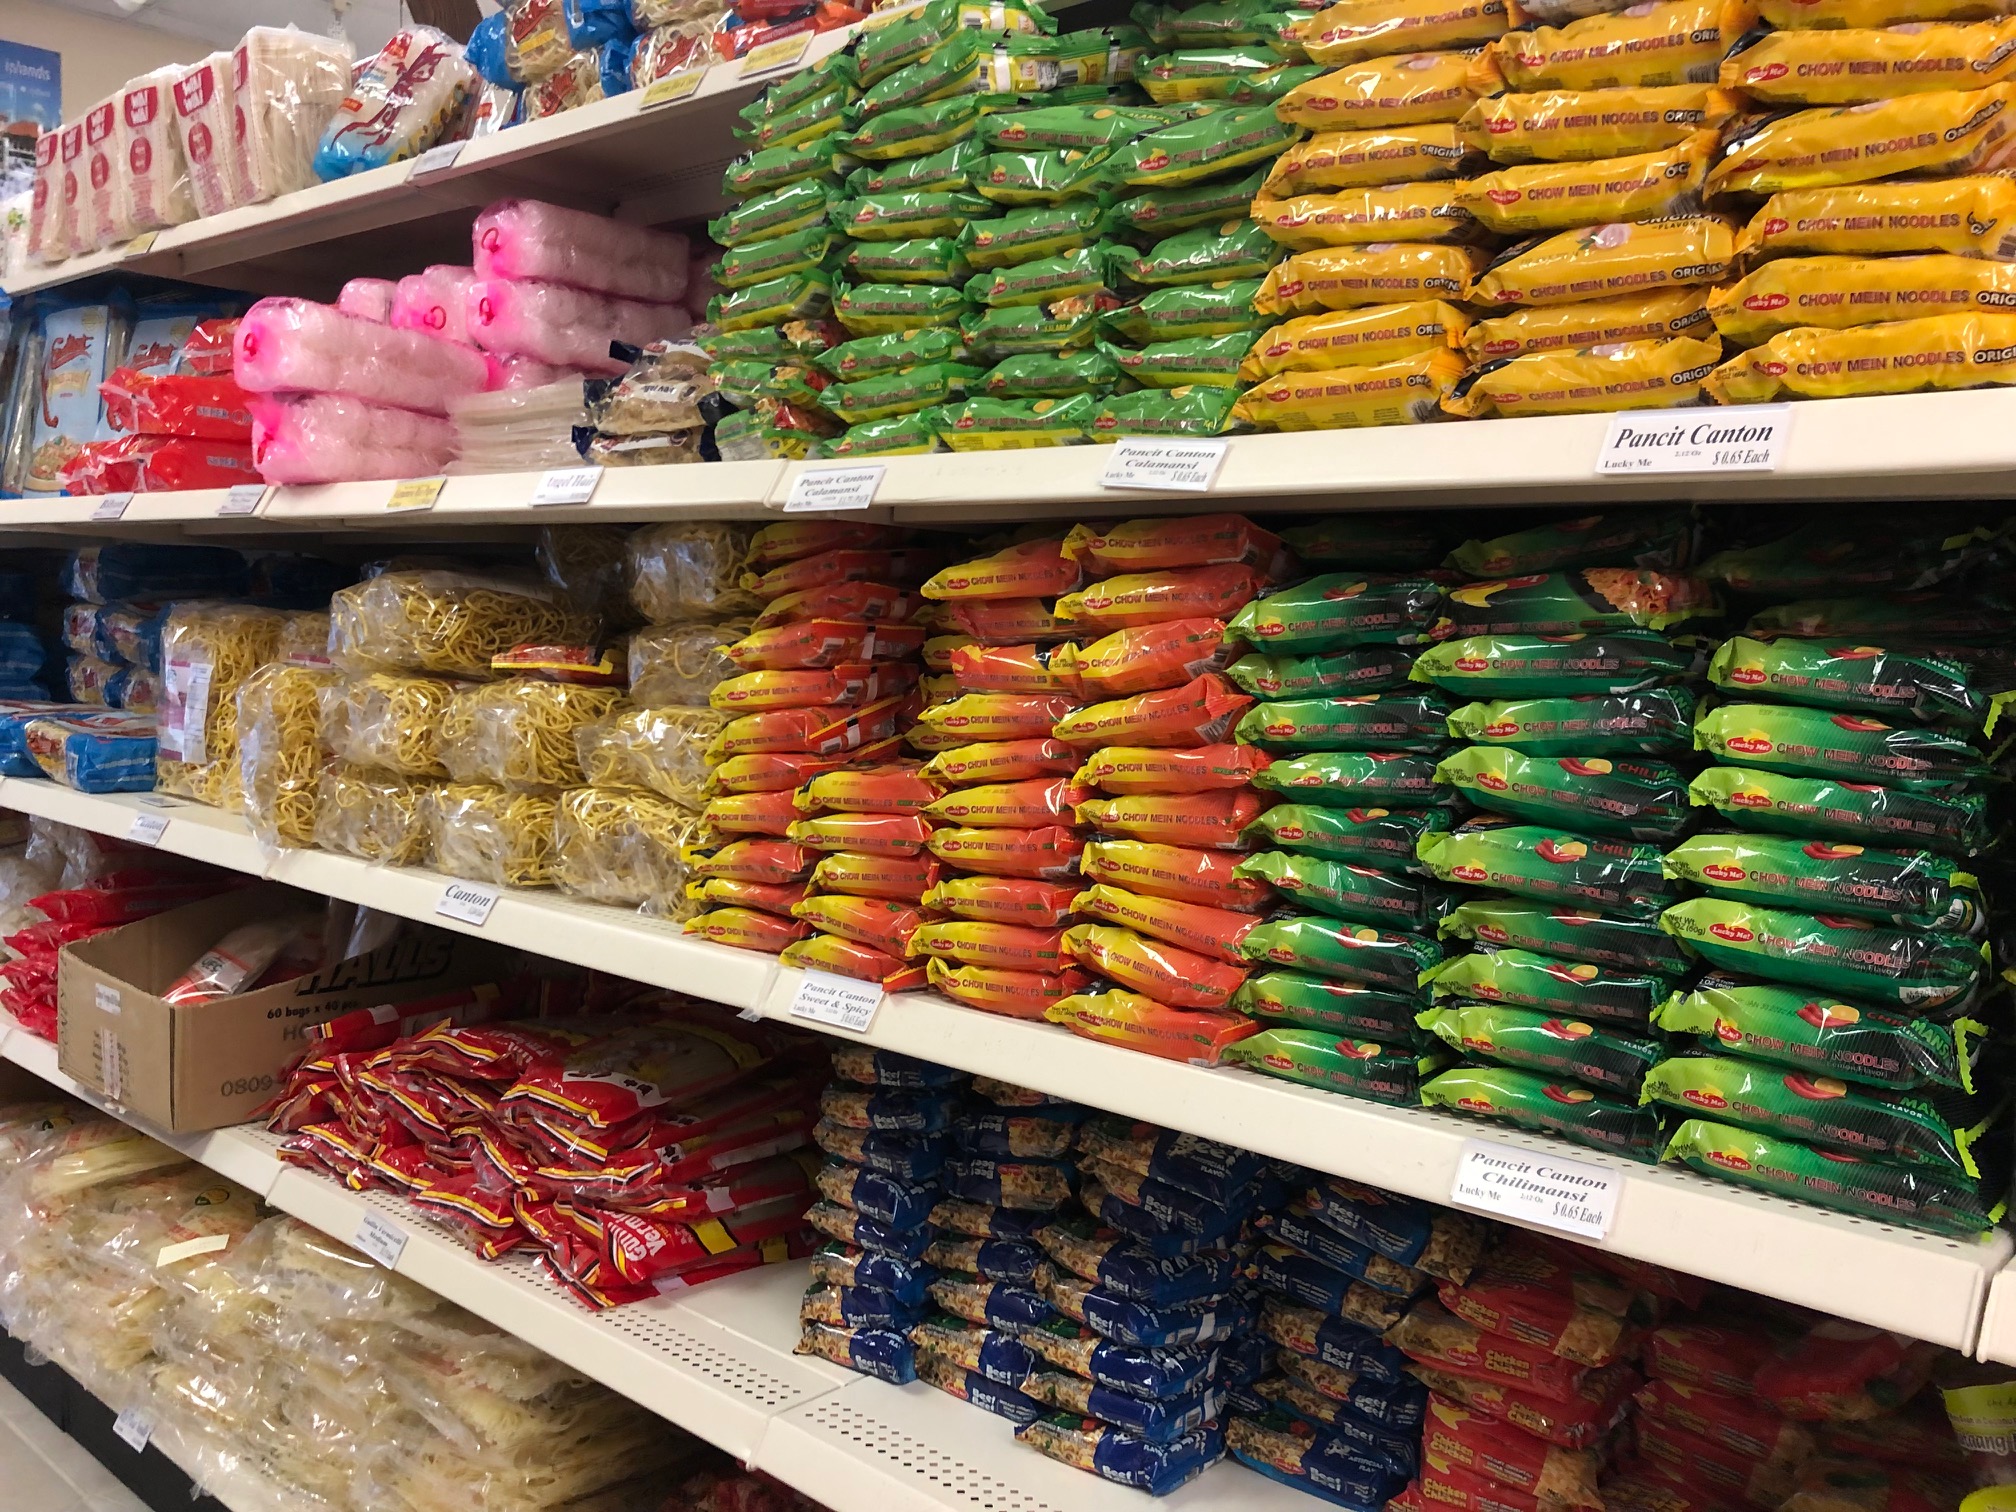 On the shelves of Maligaya's Filipino Grocery, there are colorful packets of ramen arranged neatly. Photo by Alyssa Buckley.